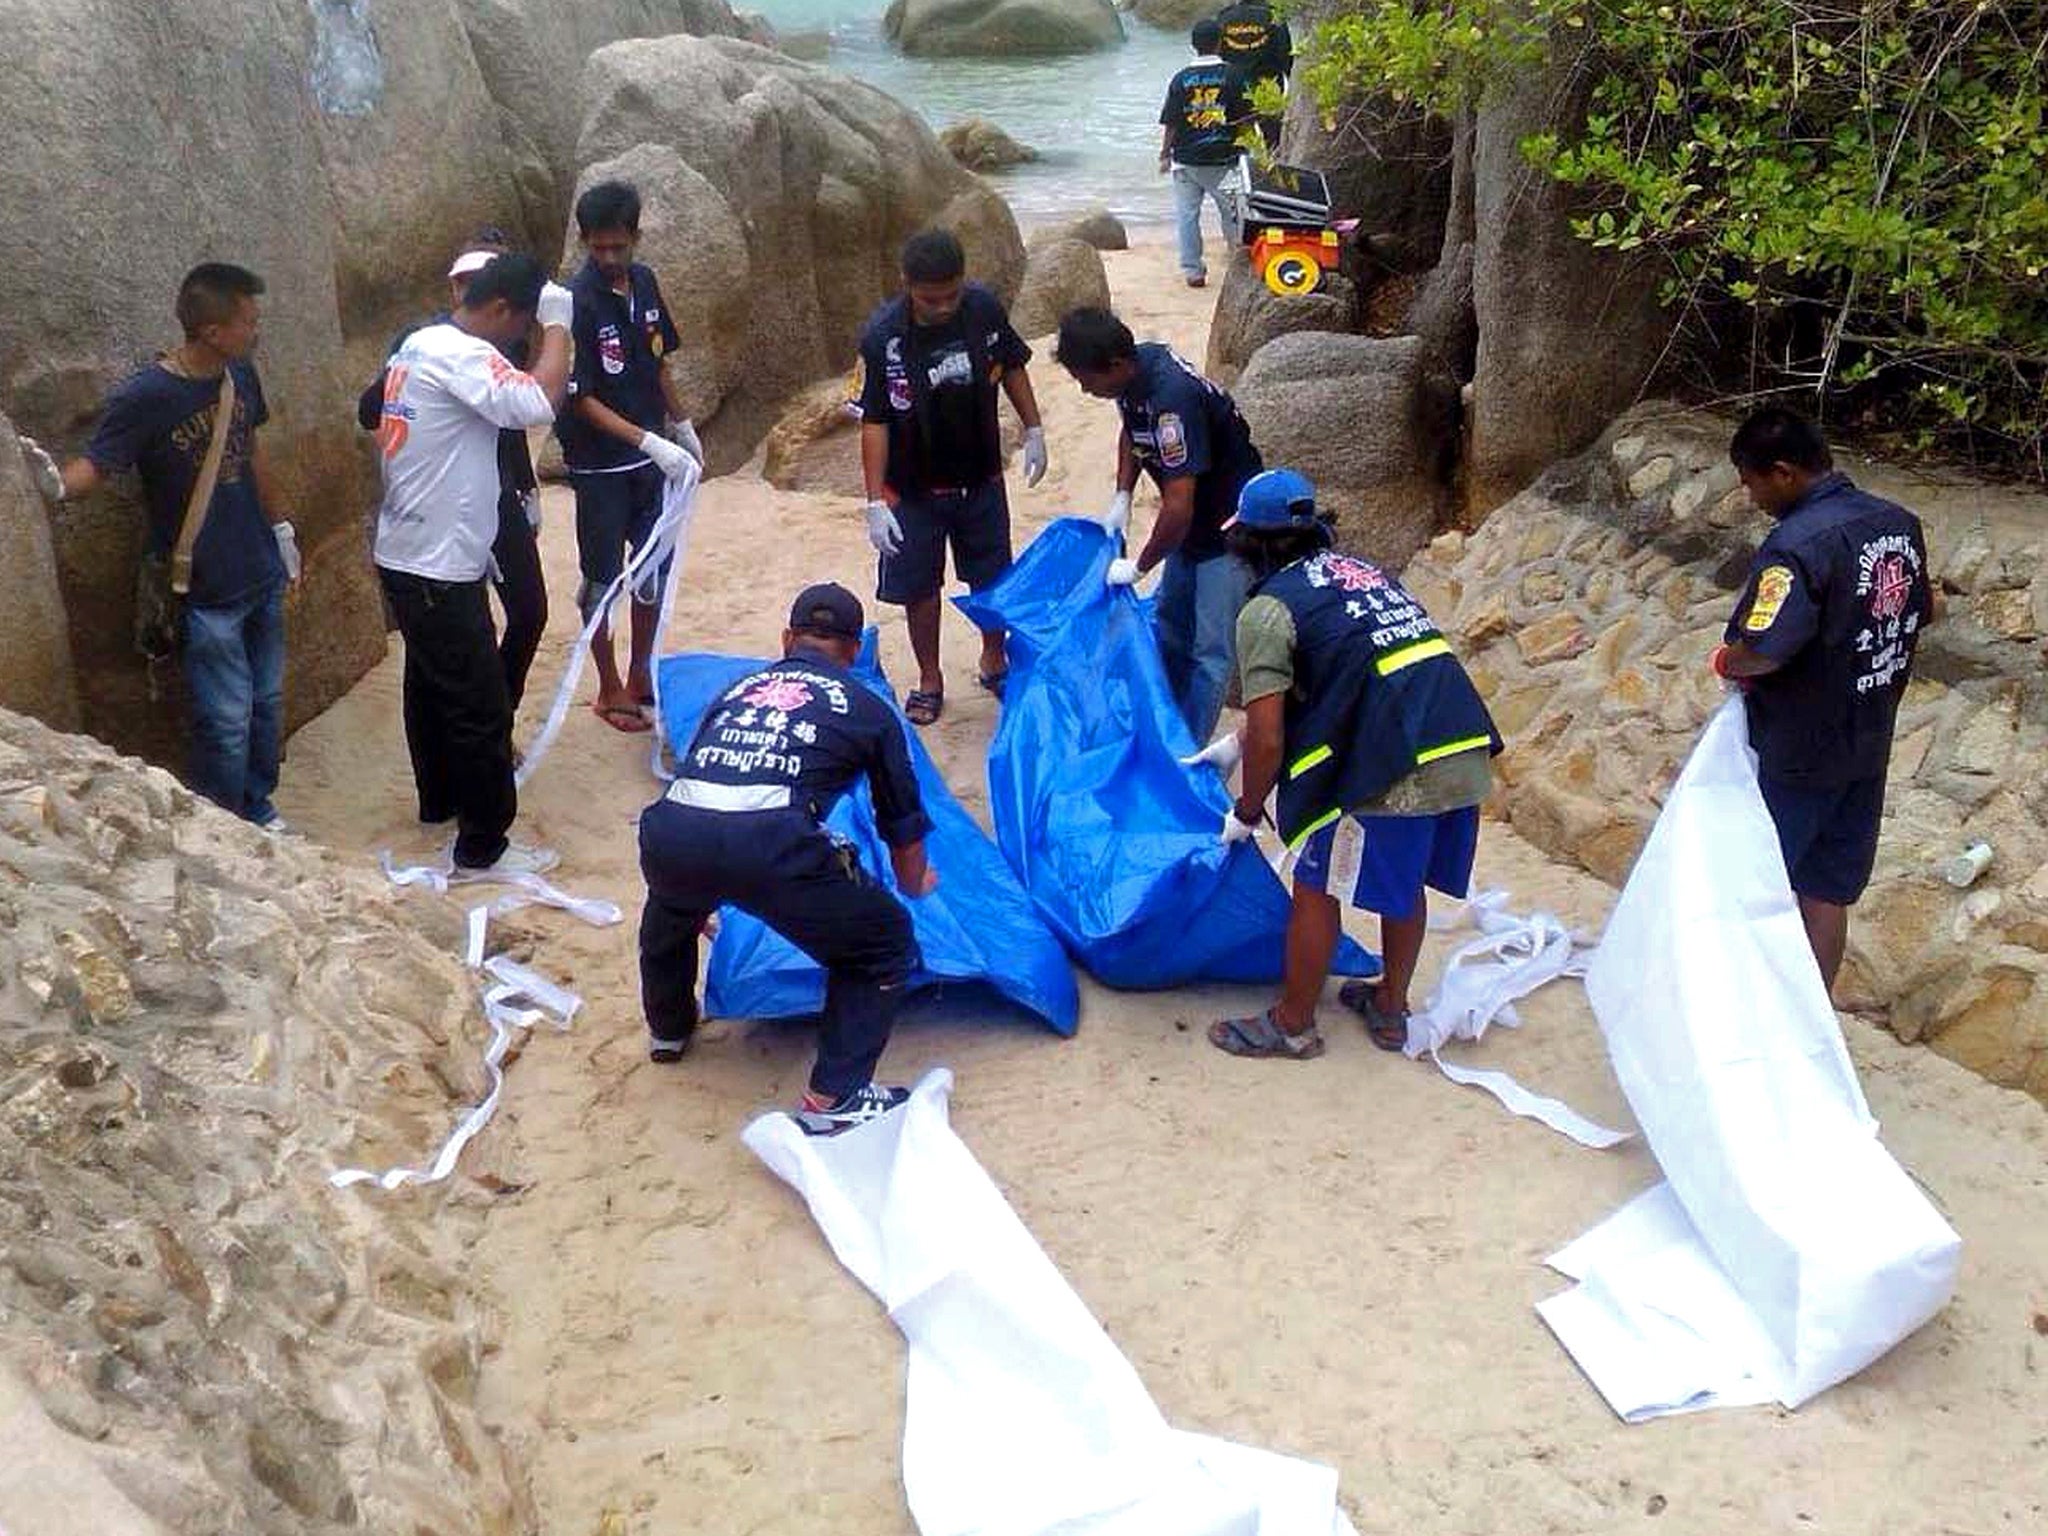 Thai workers carry the bodies of two British tourists on Koh Tao island in the Surat Thani province of southern Thailand